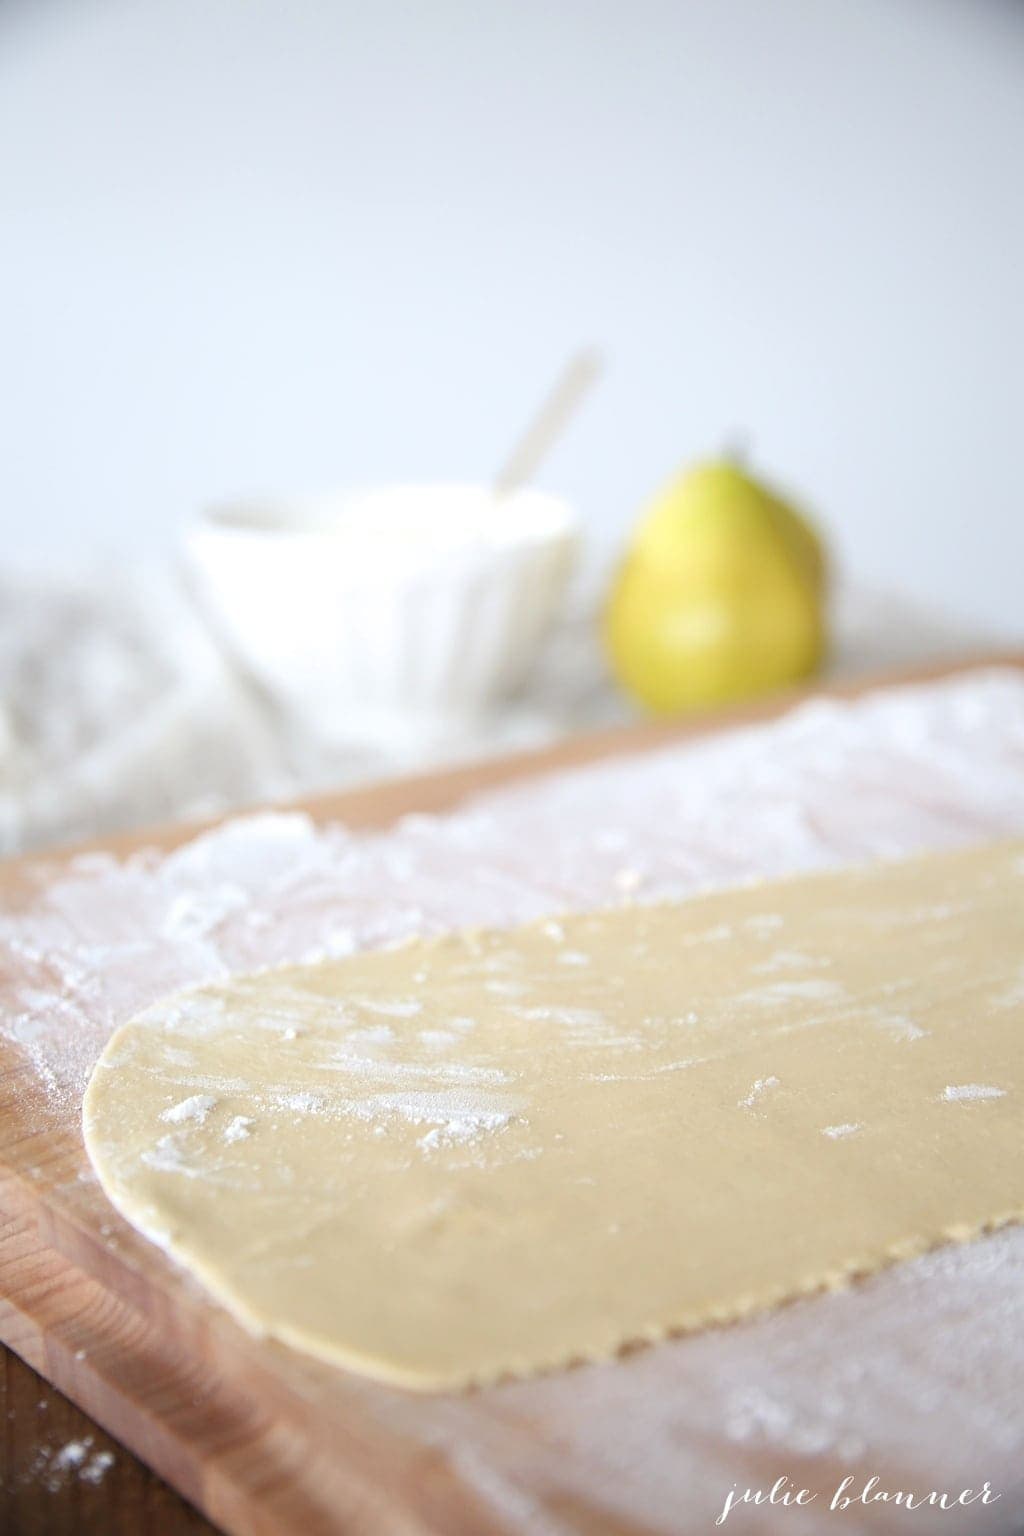 A thin sheet of pasta on a floured wooden surface. 